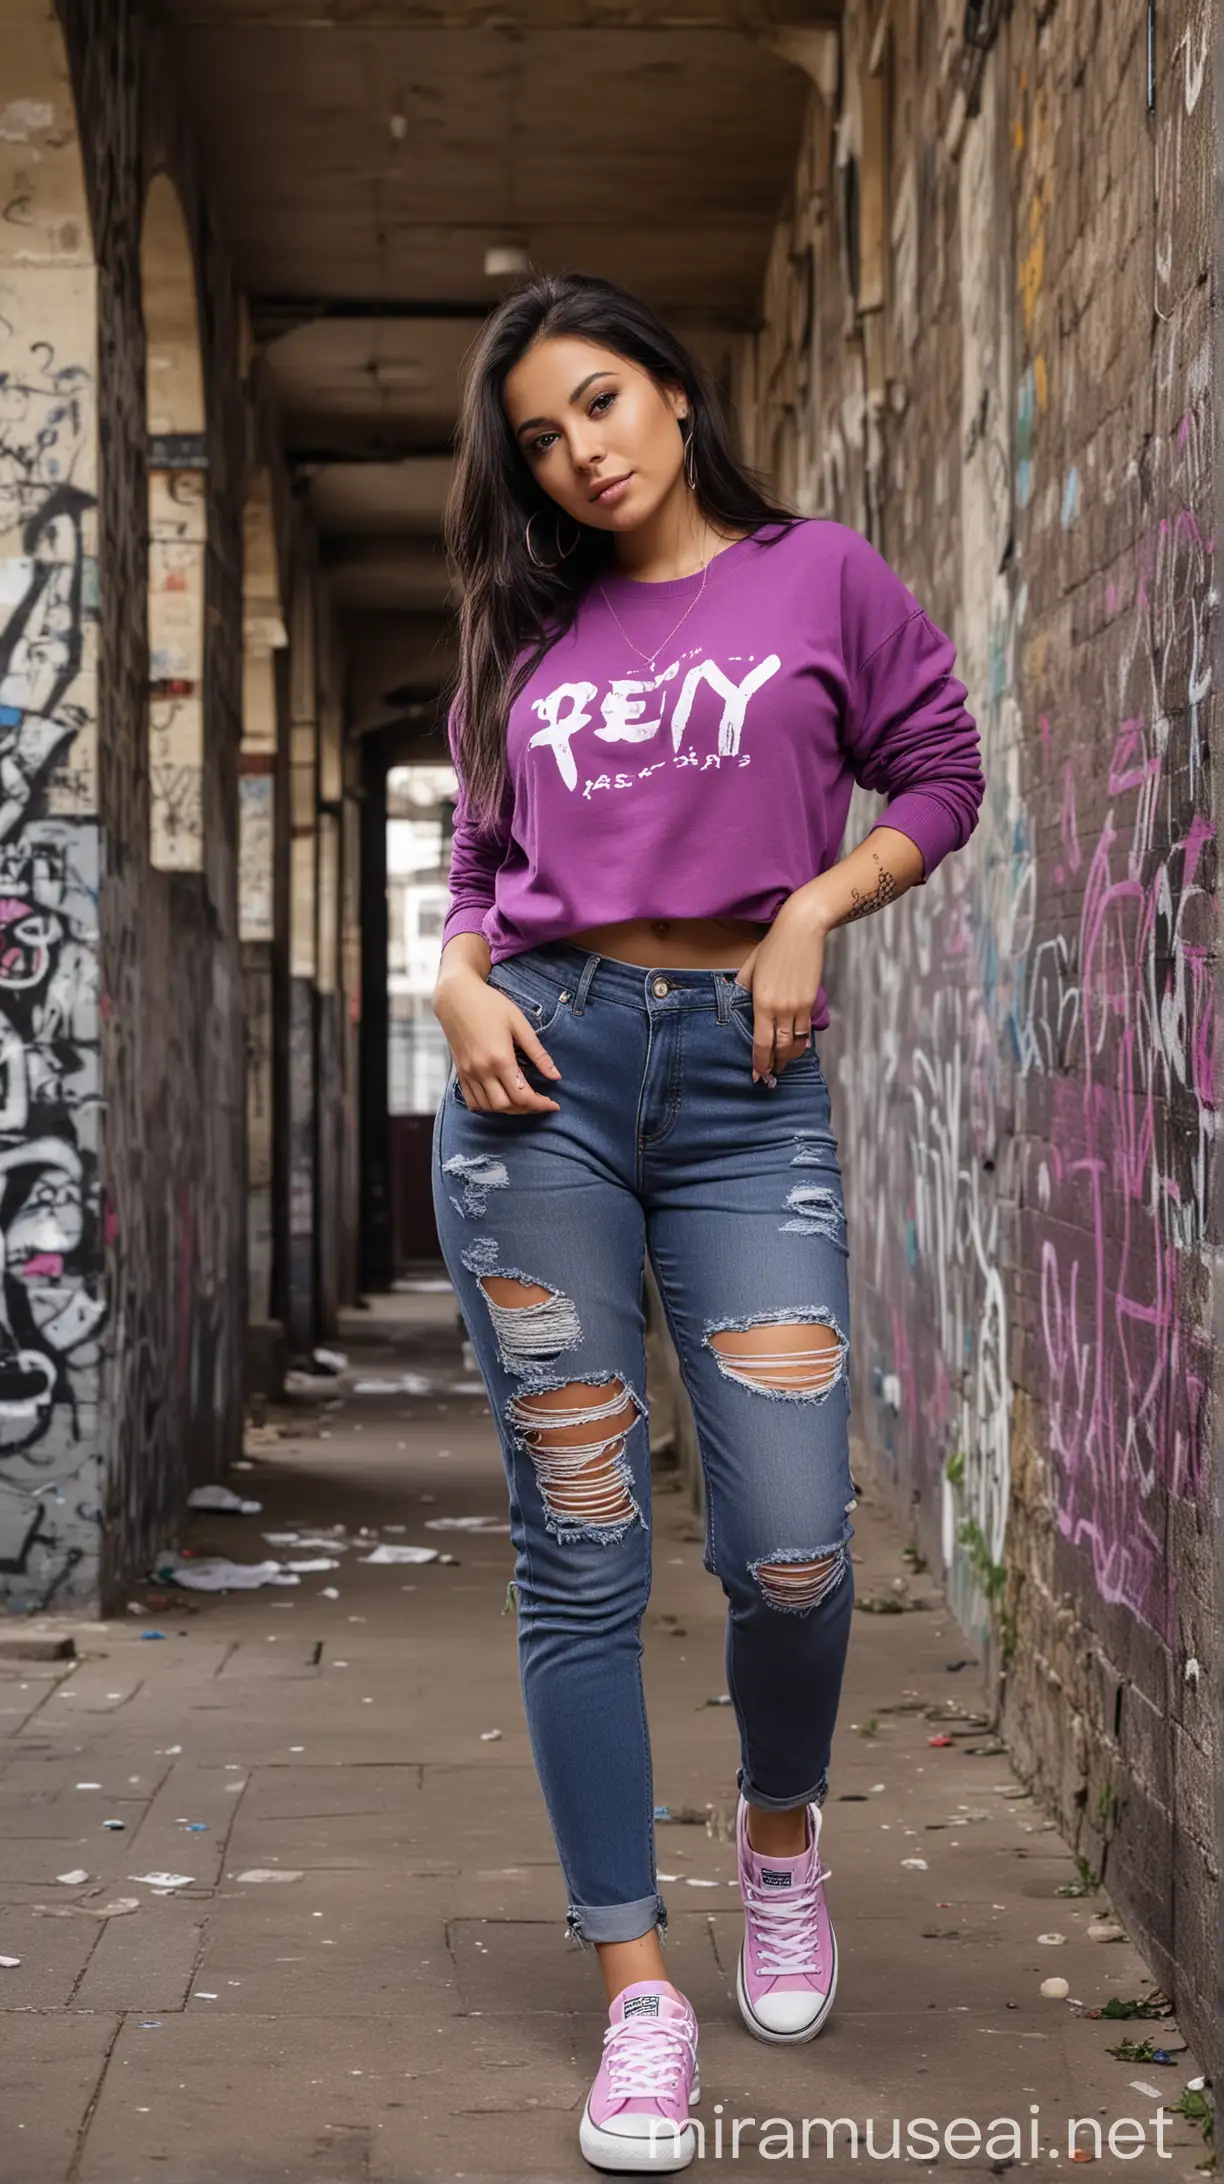 Stylish Woman in GraffitiFilled Hallway REY Sweater and Pink Converse